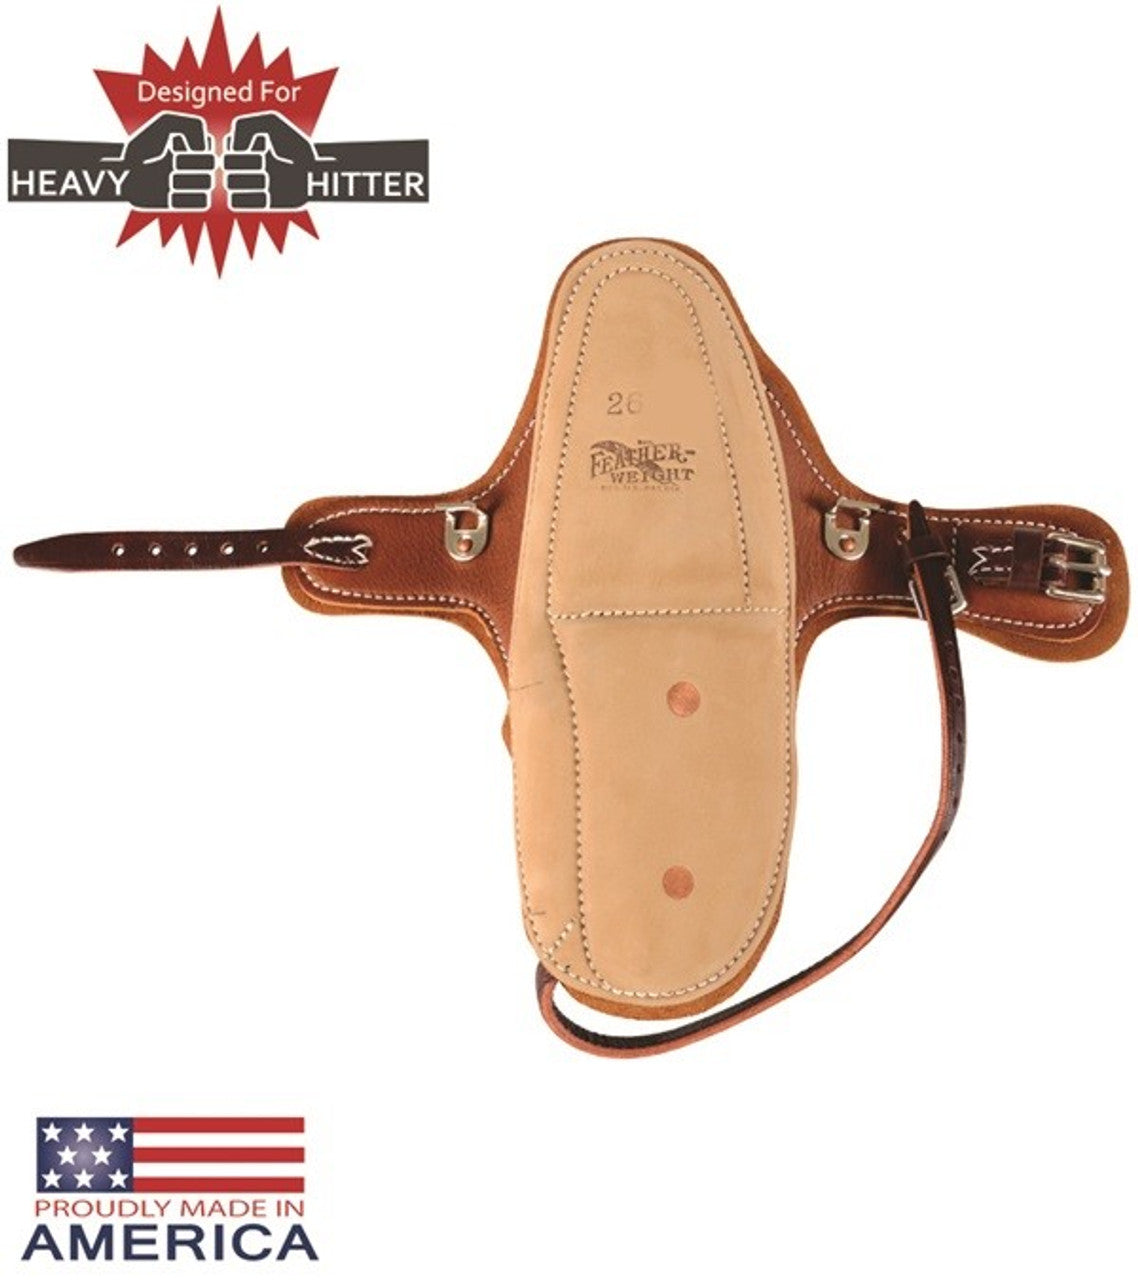 Feather-Weight Knee & Arm Boots with Steel Plate-TexanSaddles.com